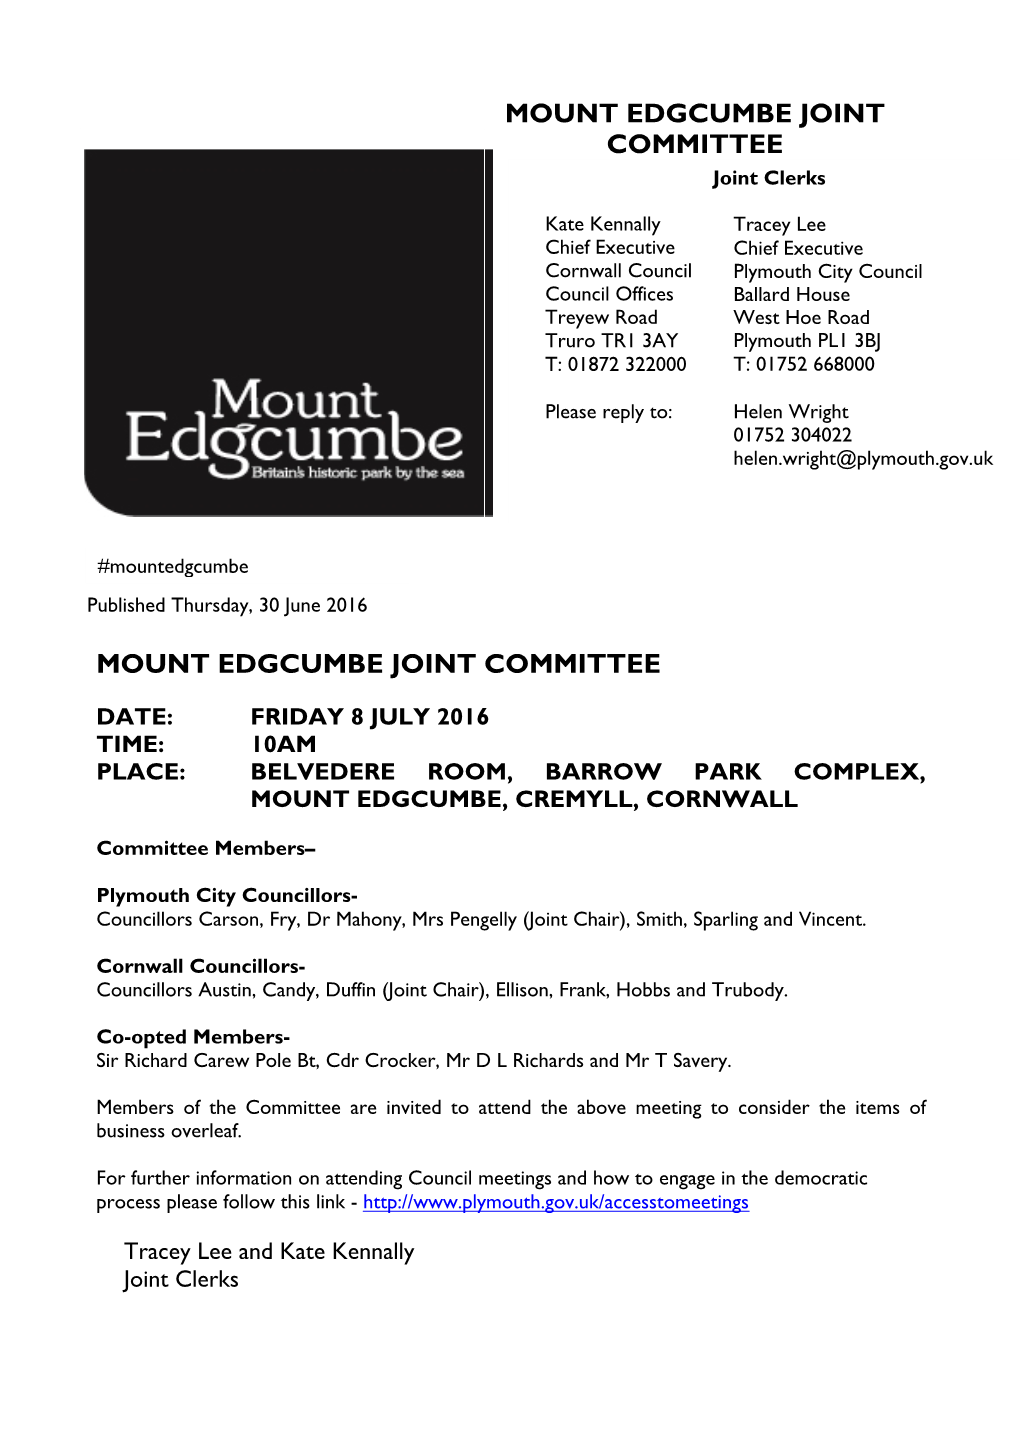 (Public Pack)Agenda Document for Mount Edgcumbe Joint Committee